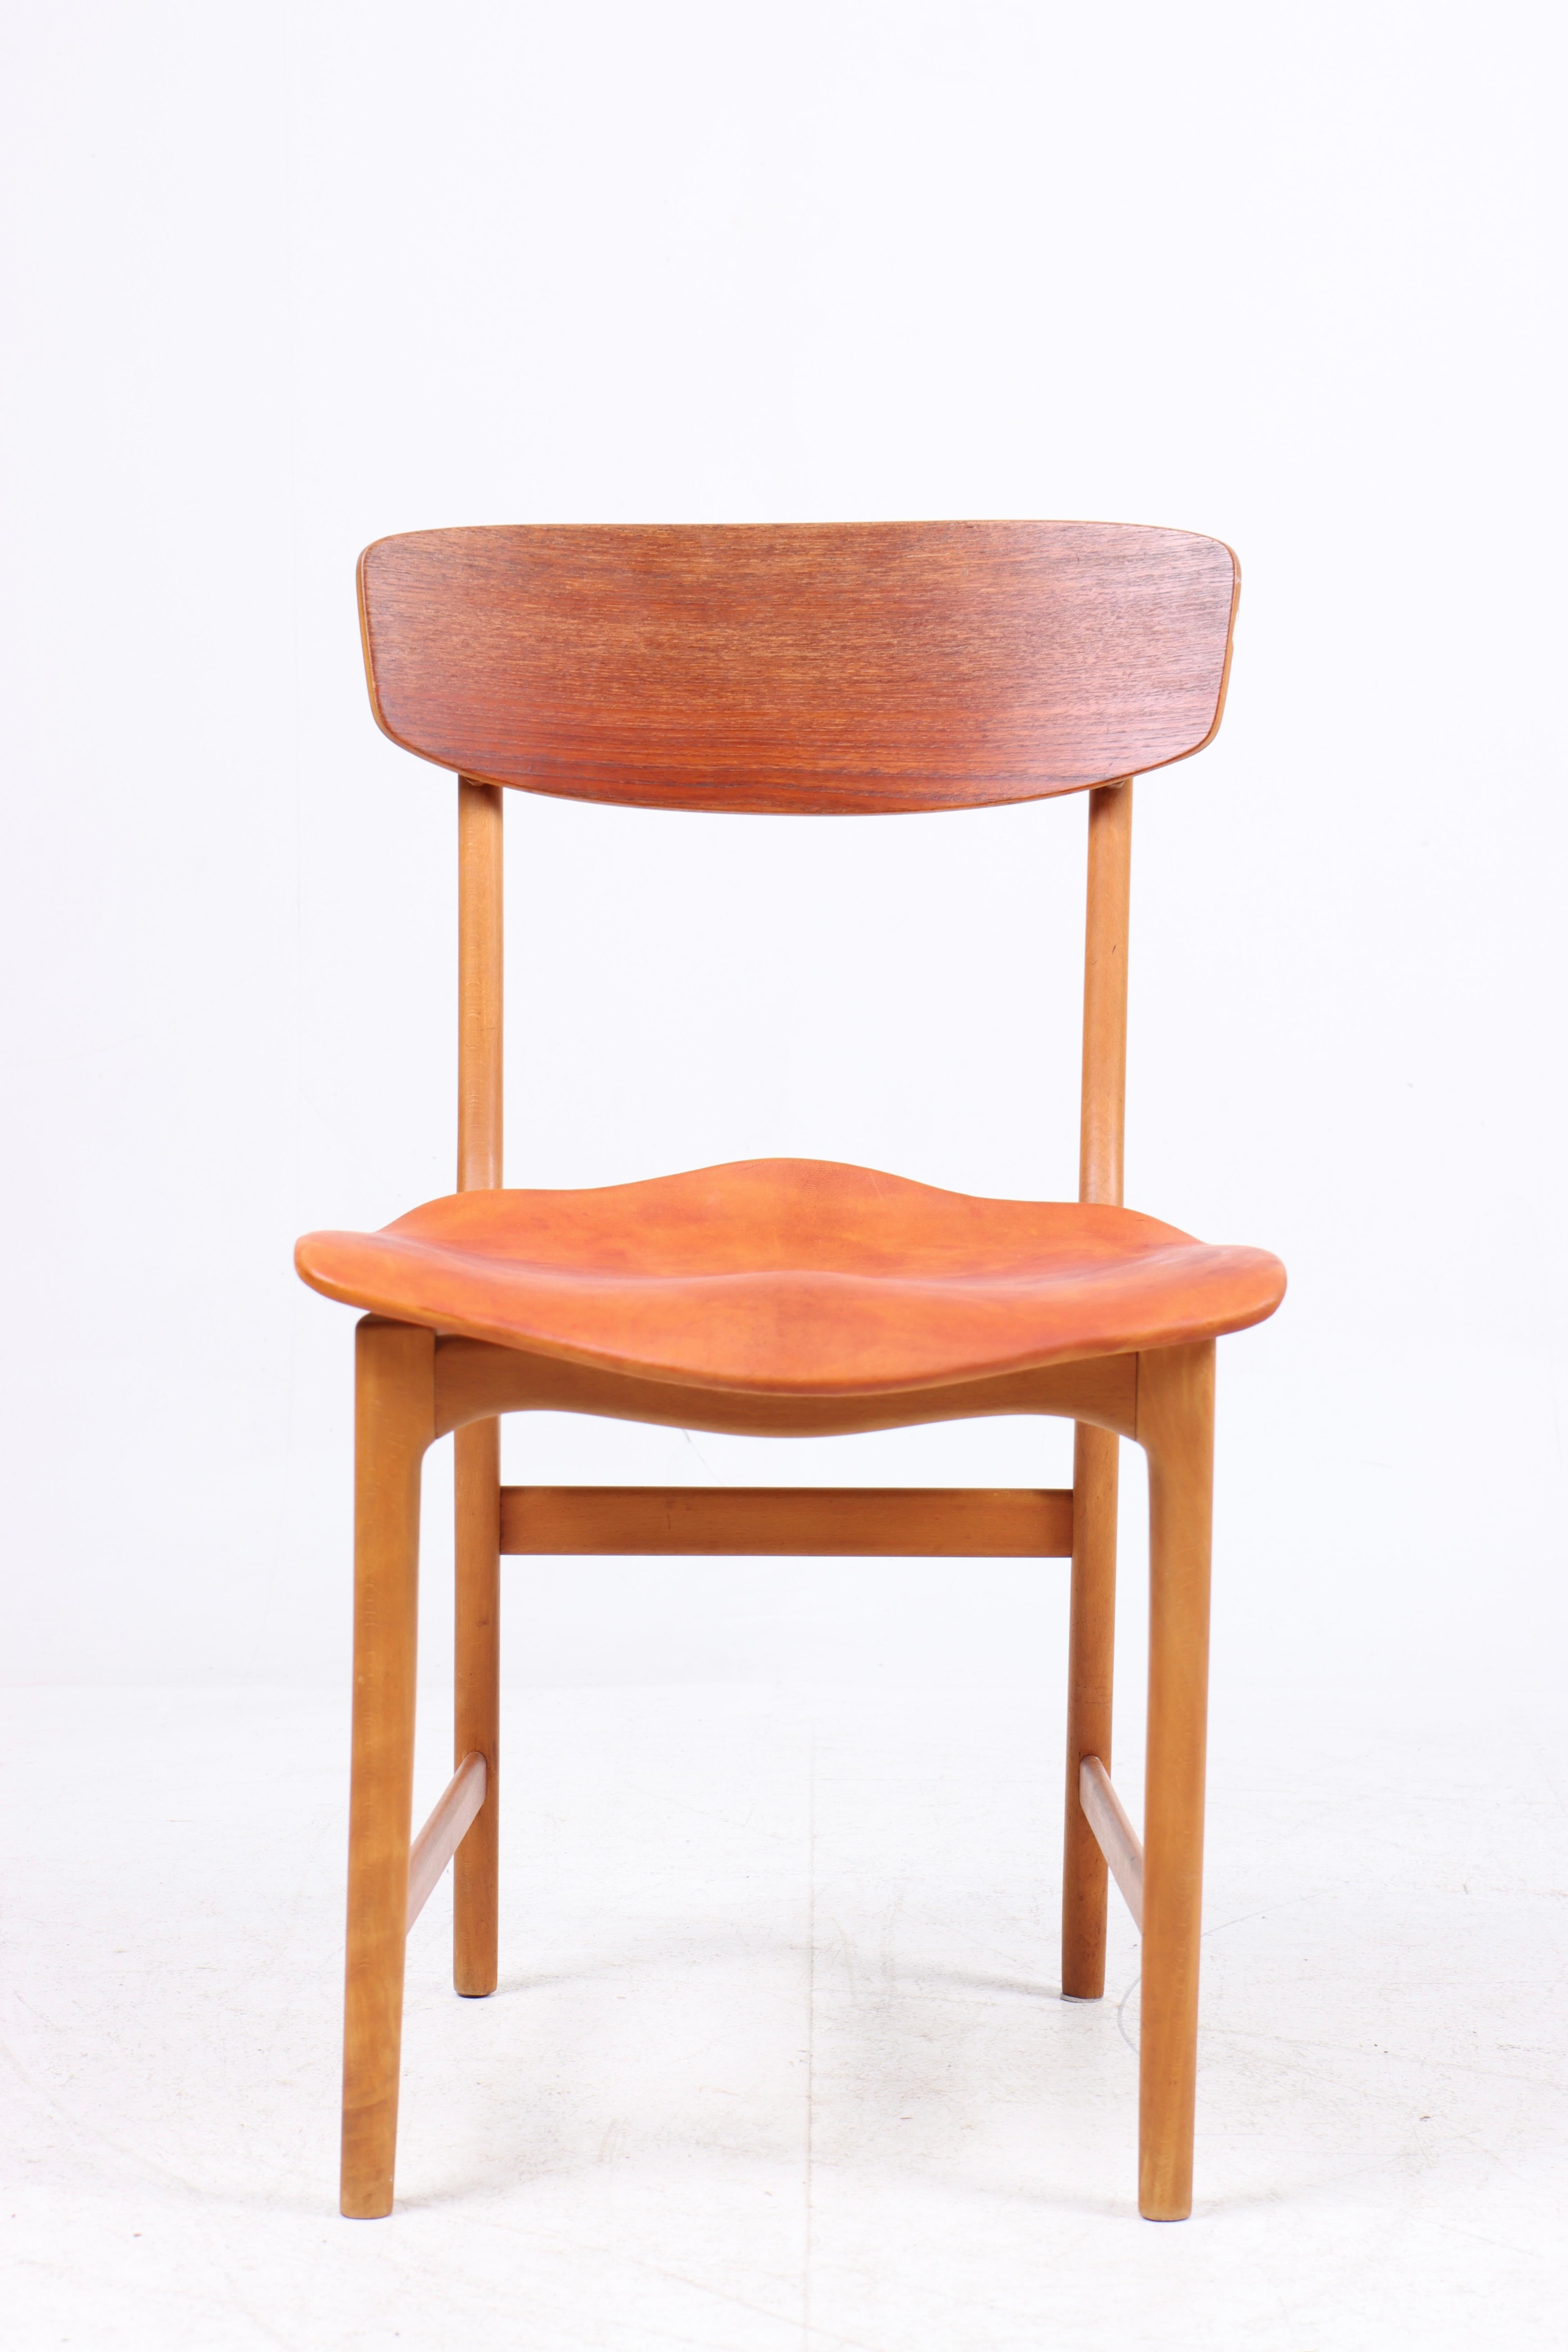 Scandinavian Modern Set of Four Side Chairs in Teak and Leather, Danish Design, 1960s For Sale